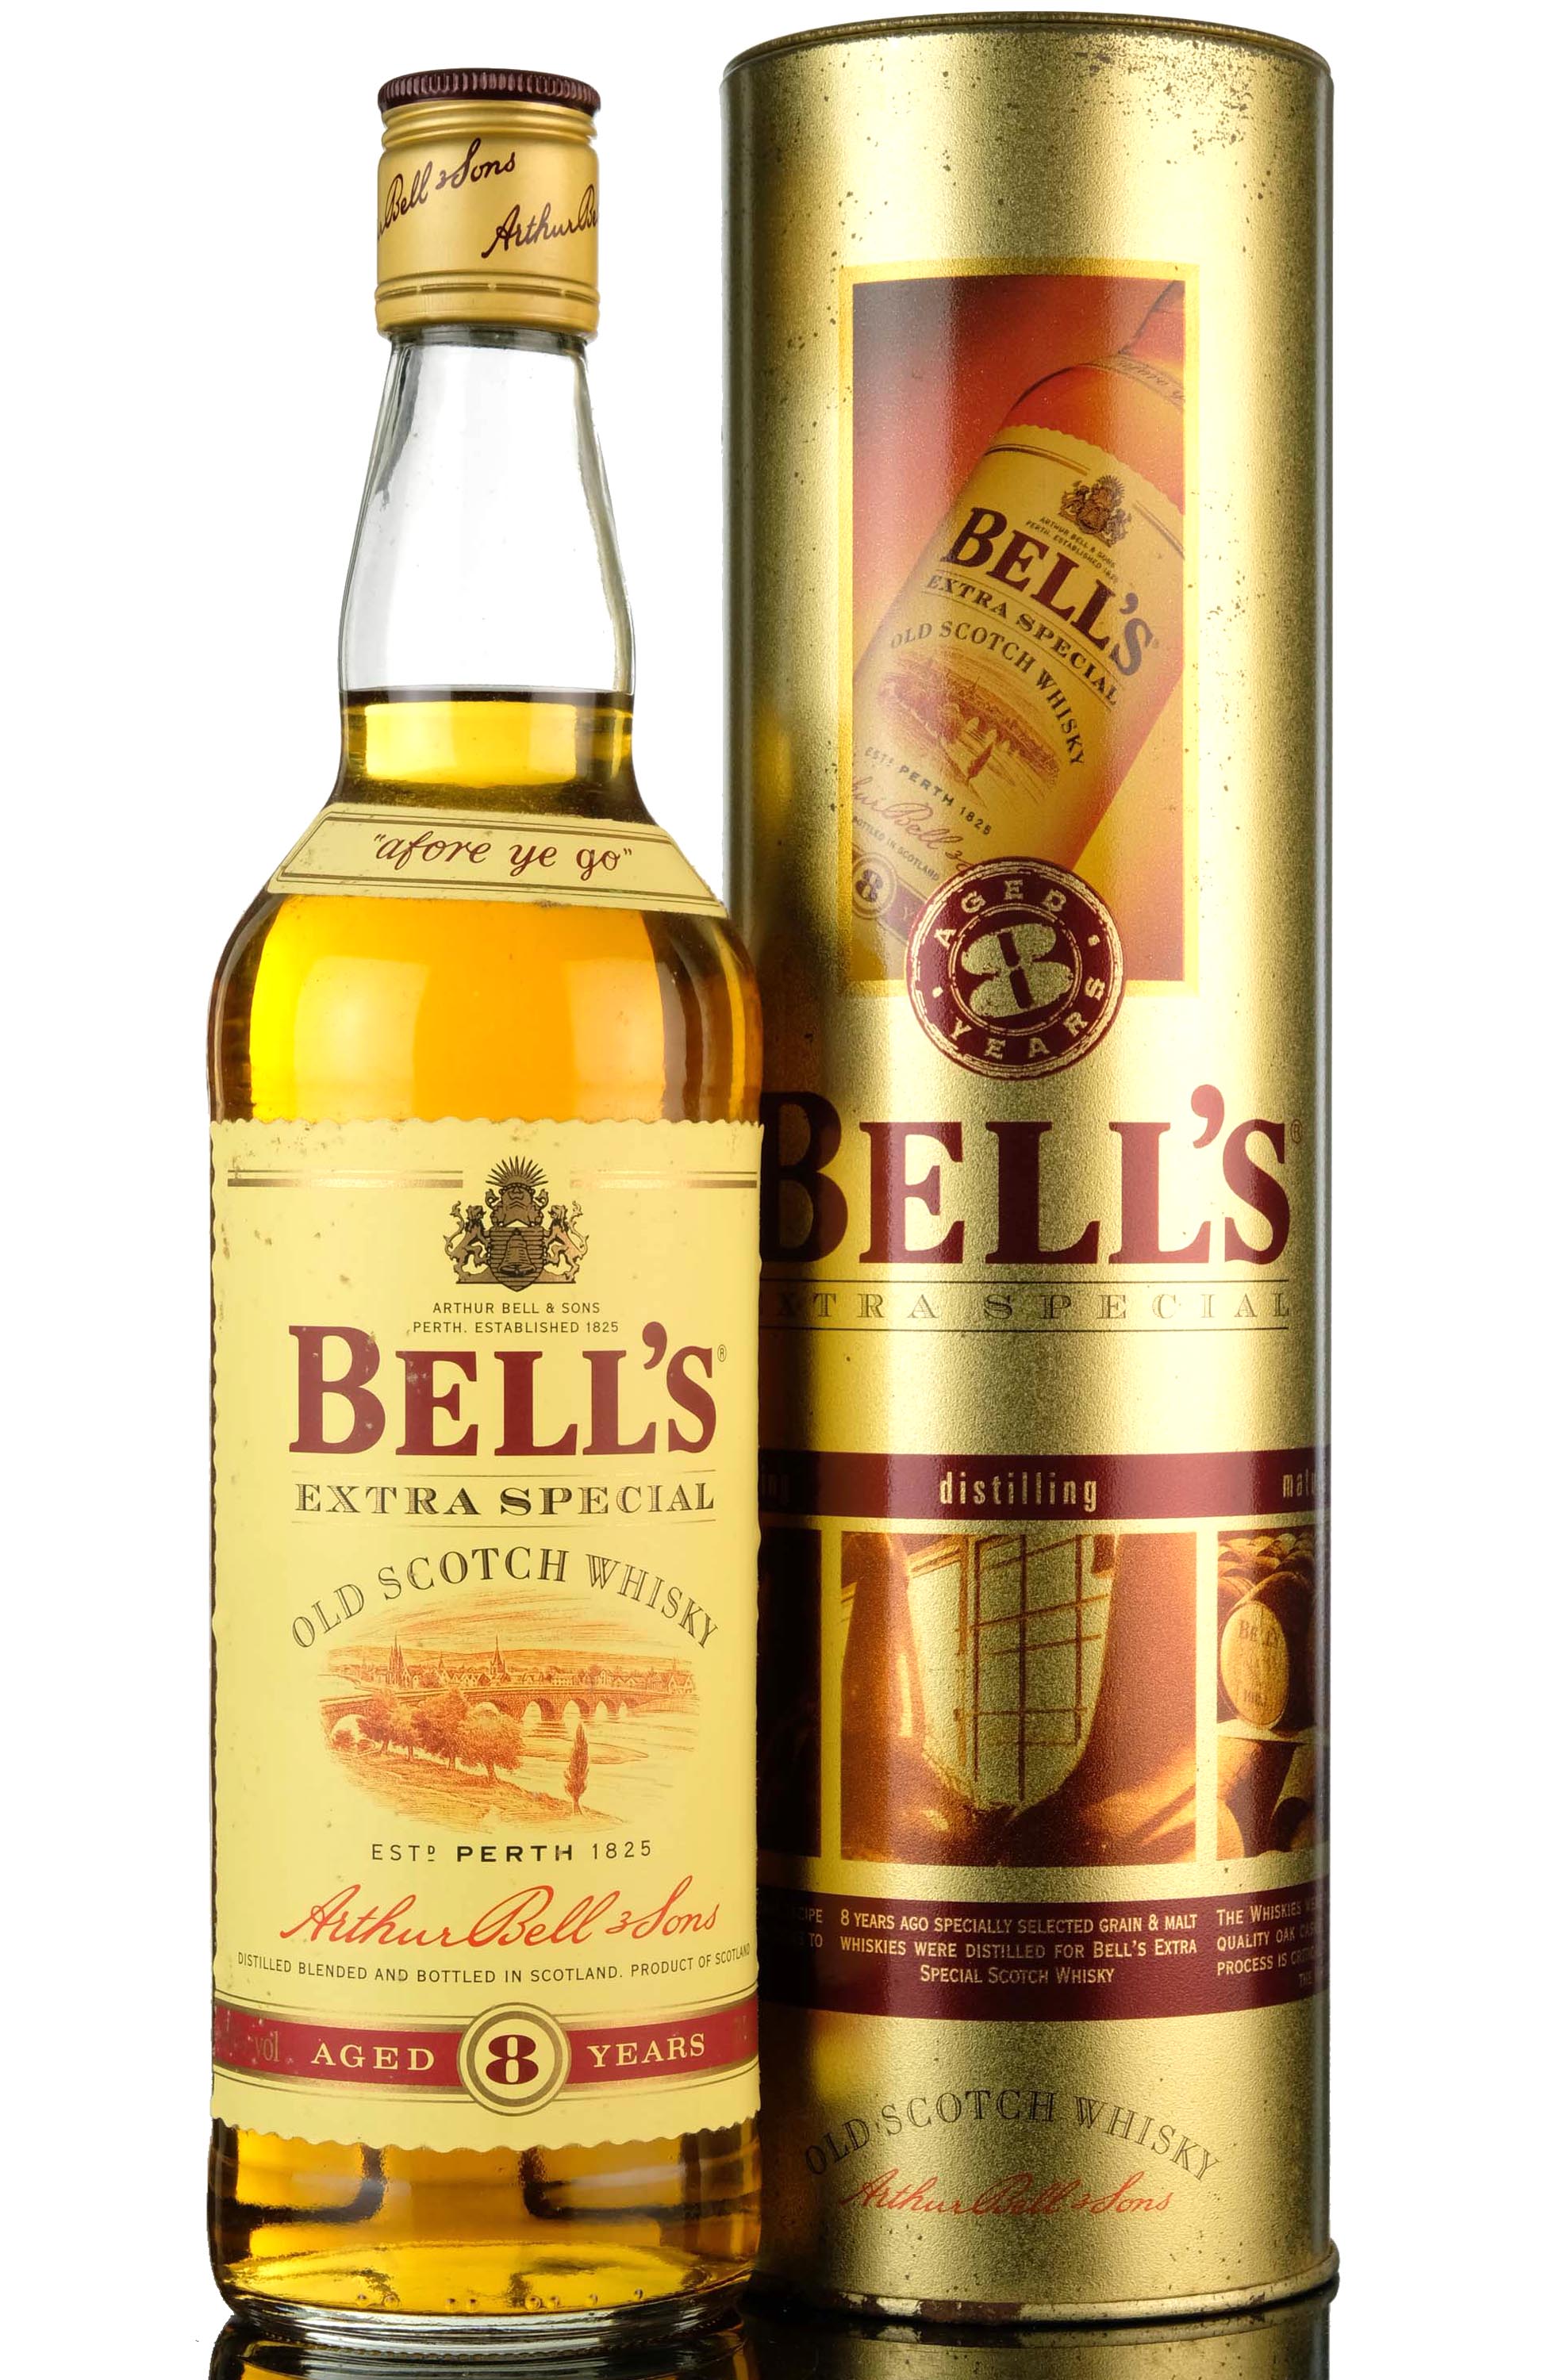 Bells 8 Year Old